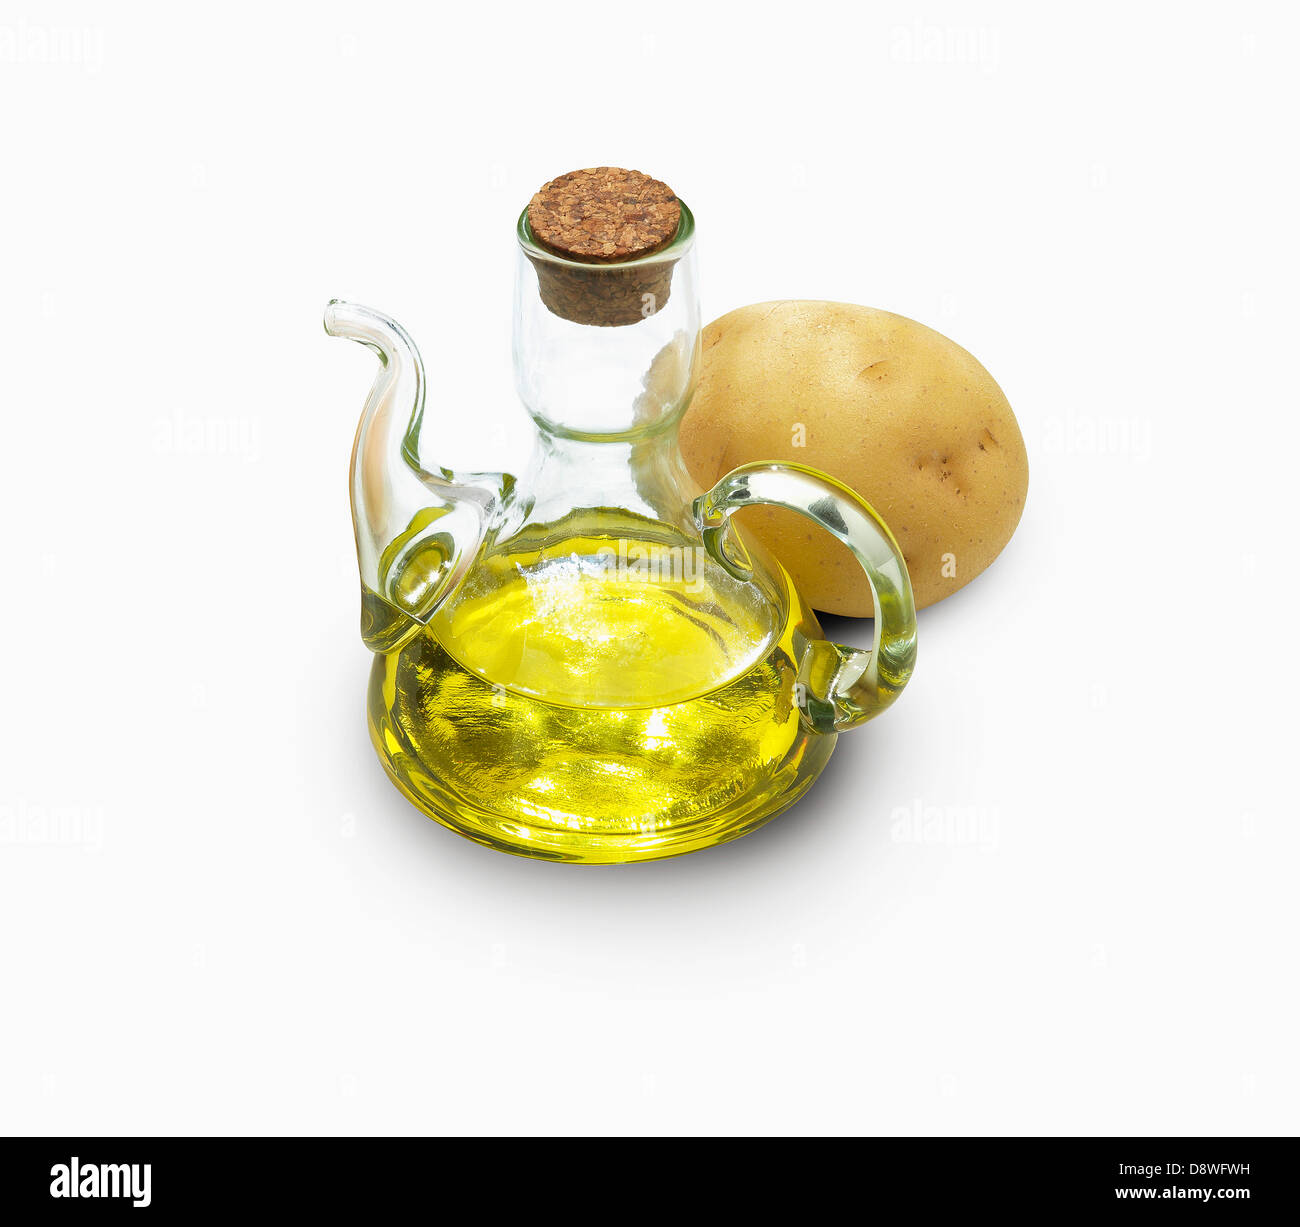 Small bottle of oil and a potato Stock Photo